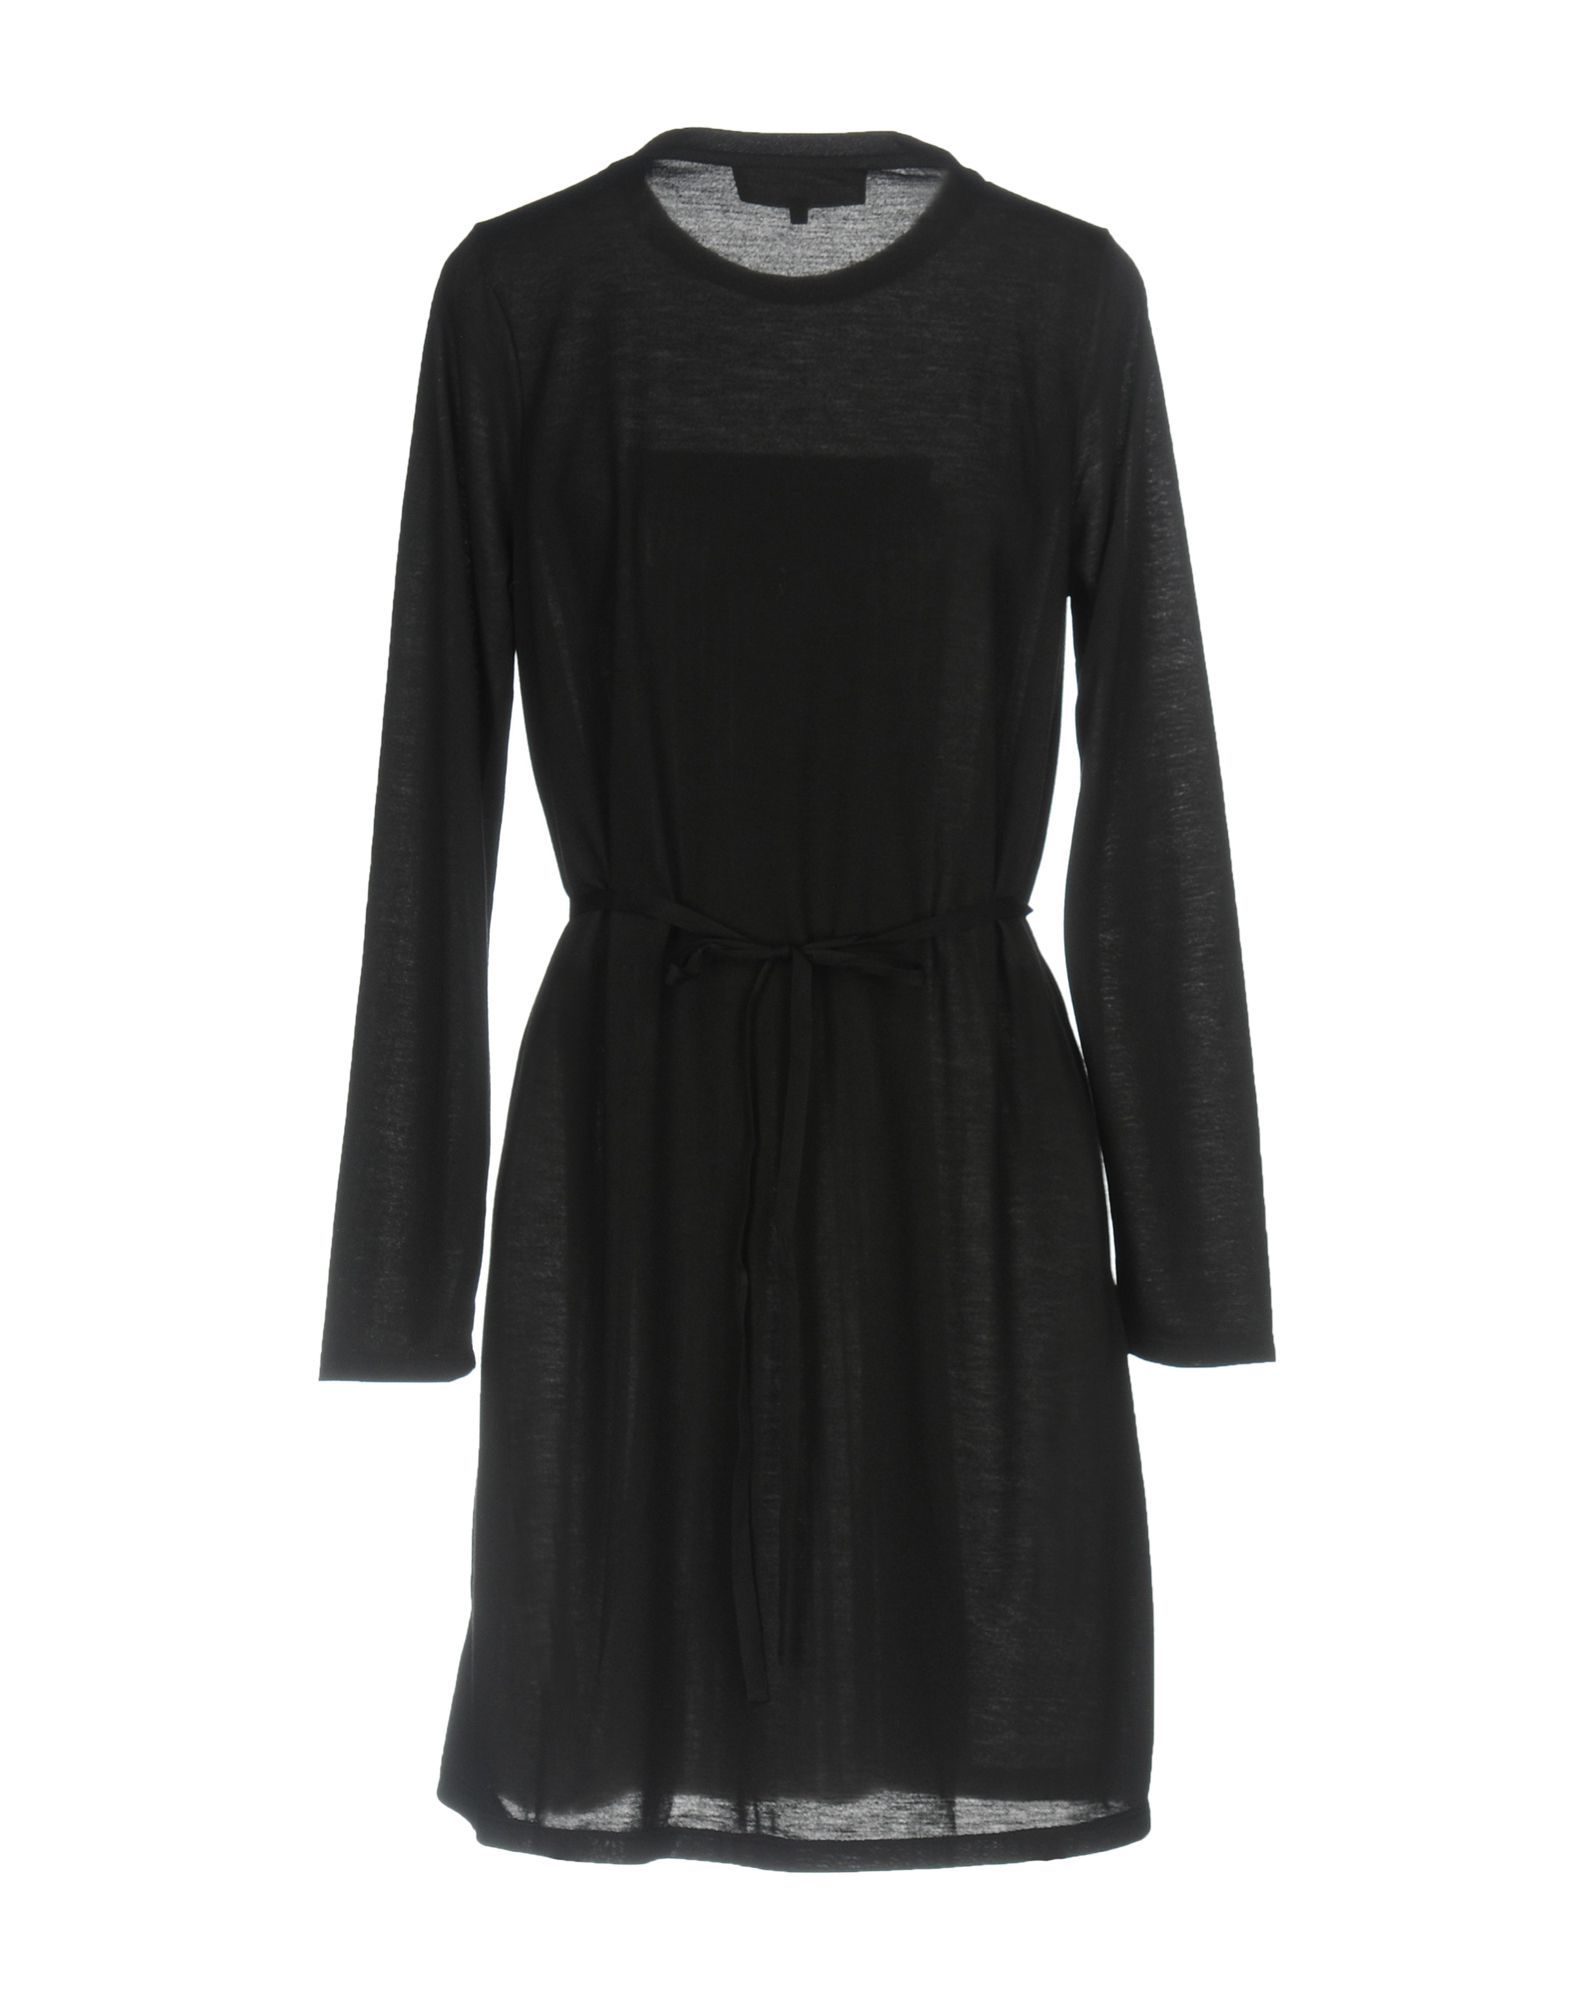 jersey, lacing, solid colour, round collar, long sleeves, no pockets, unlined, no fastening, dress